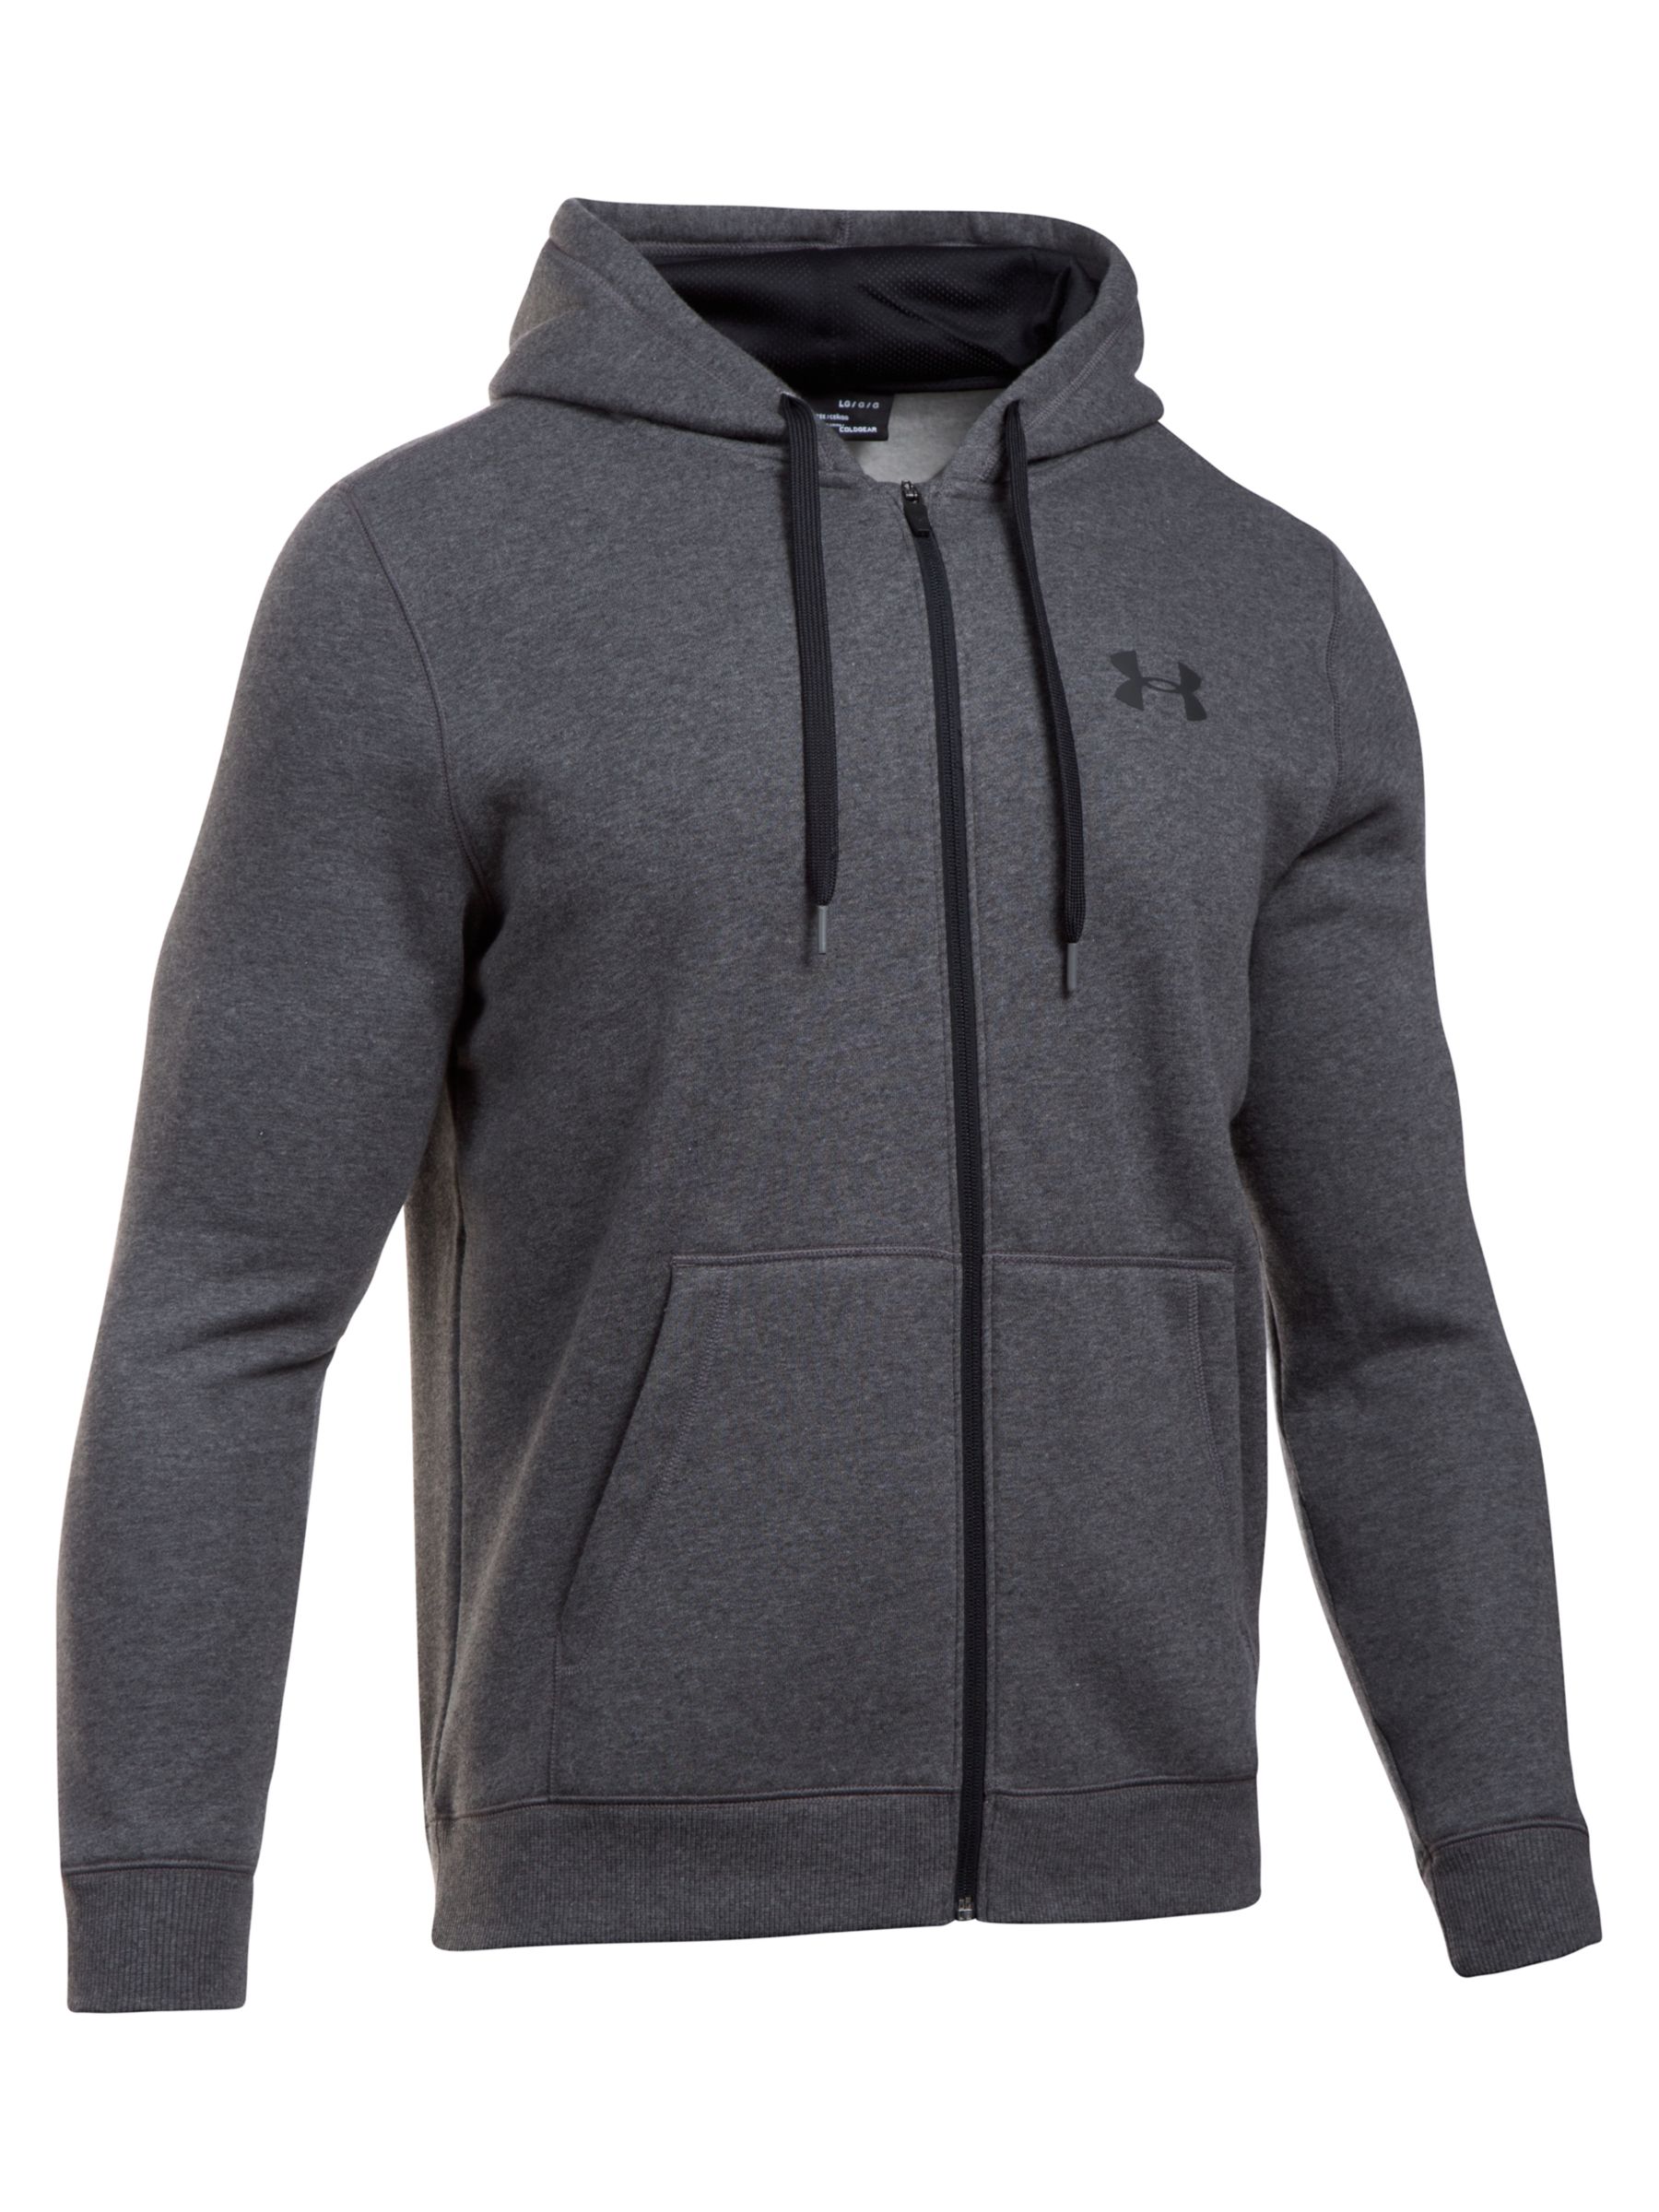 Under Armour Rival Fitted Graphic Hoodie, Grey at John Lewis & Partners